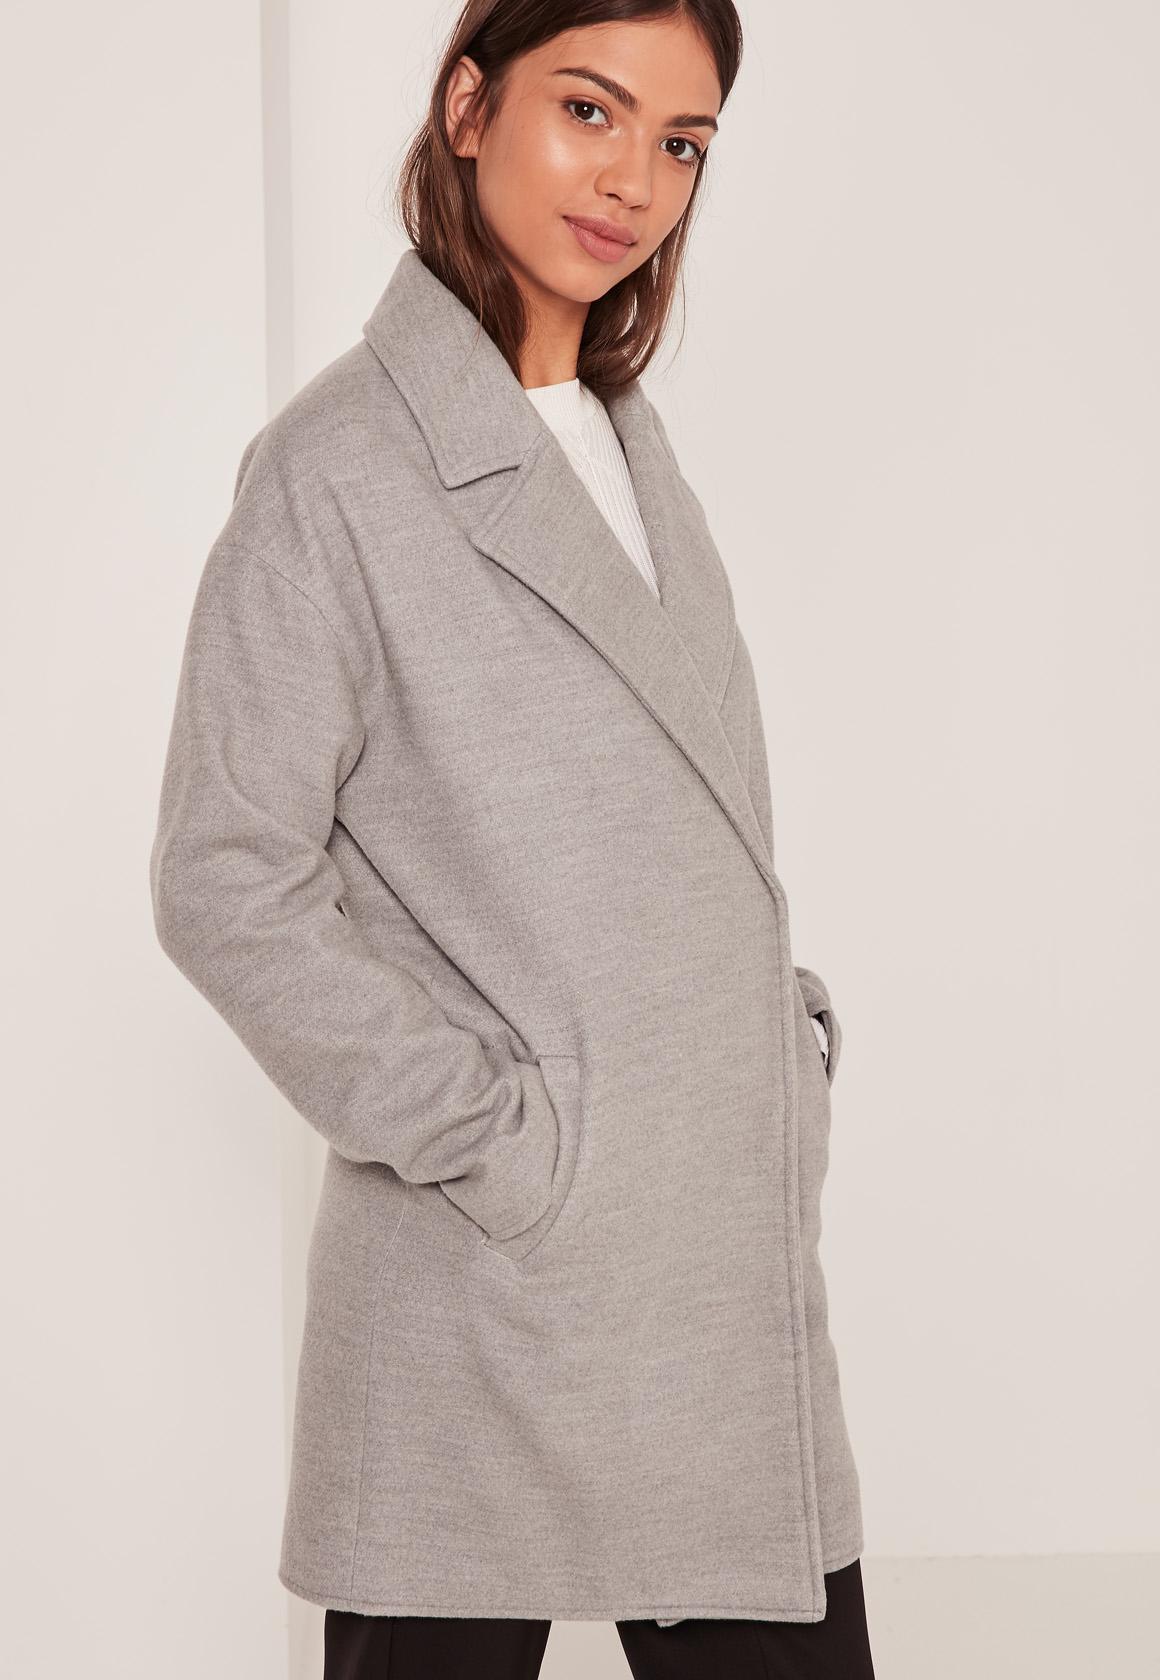 Lyst - Missguided Grey Drop Shoulder Double Breasted Faux Wool Coat in Gray